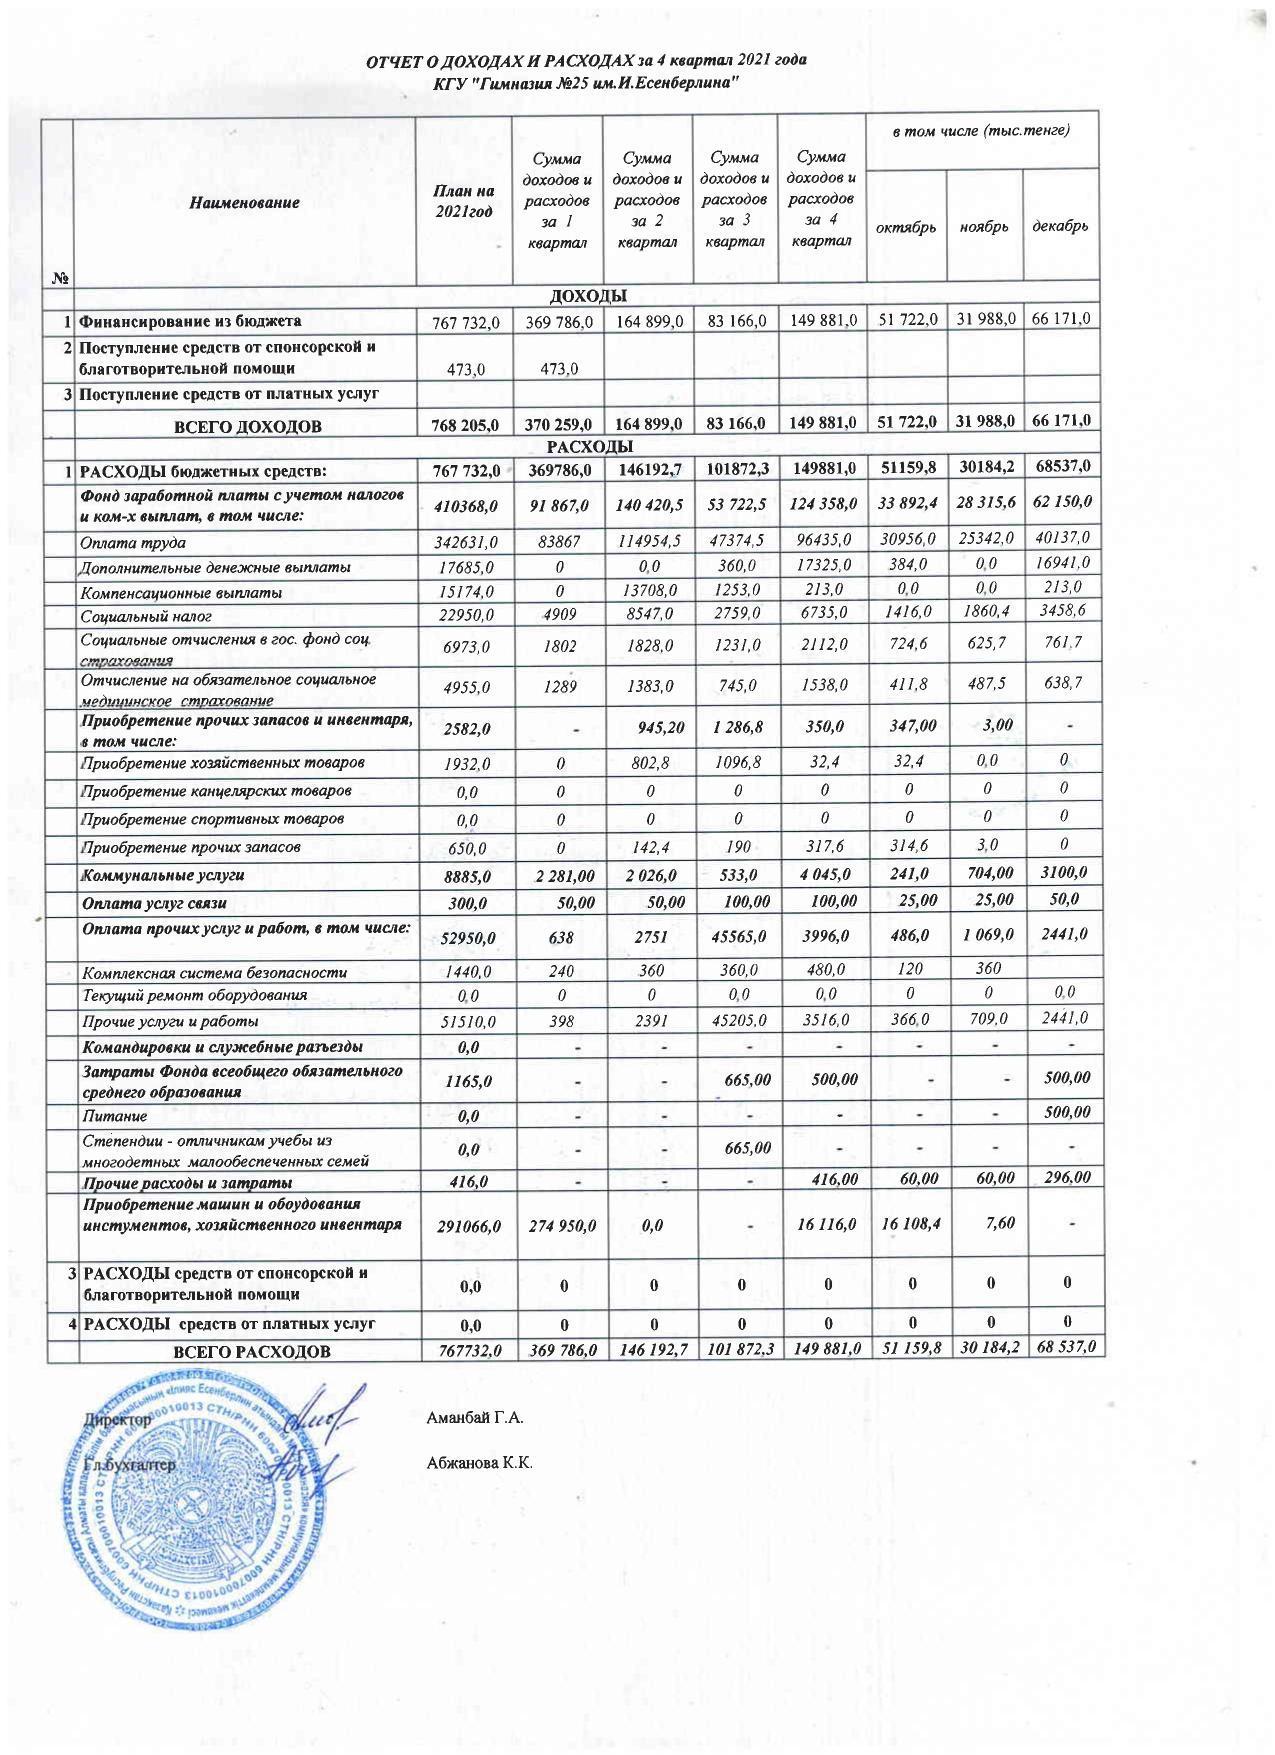 Statement of income and expenses 4 квартал 2021